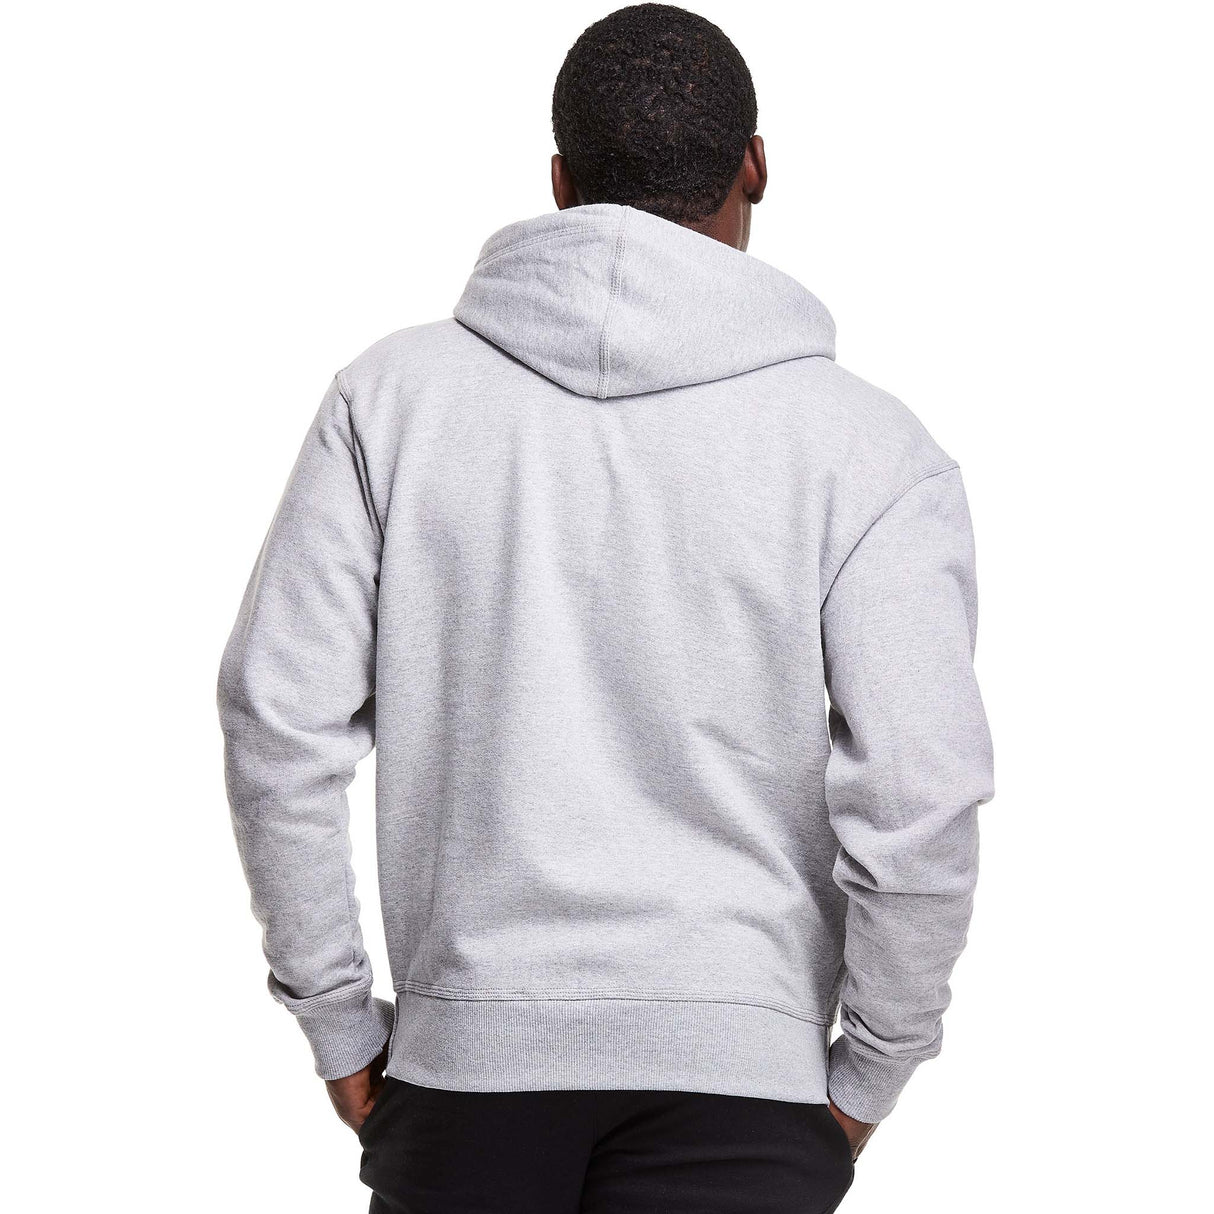 Champion Powerblend Graphic Hoodie à fermeture eclair oxford grey homme dos